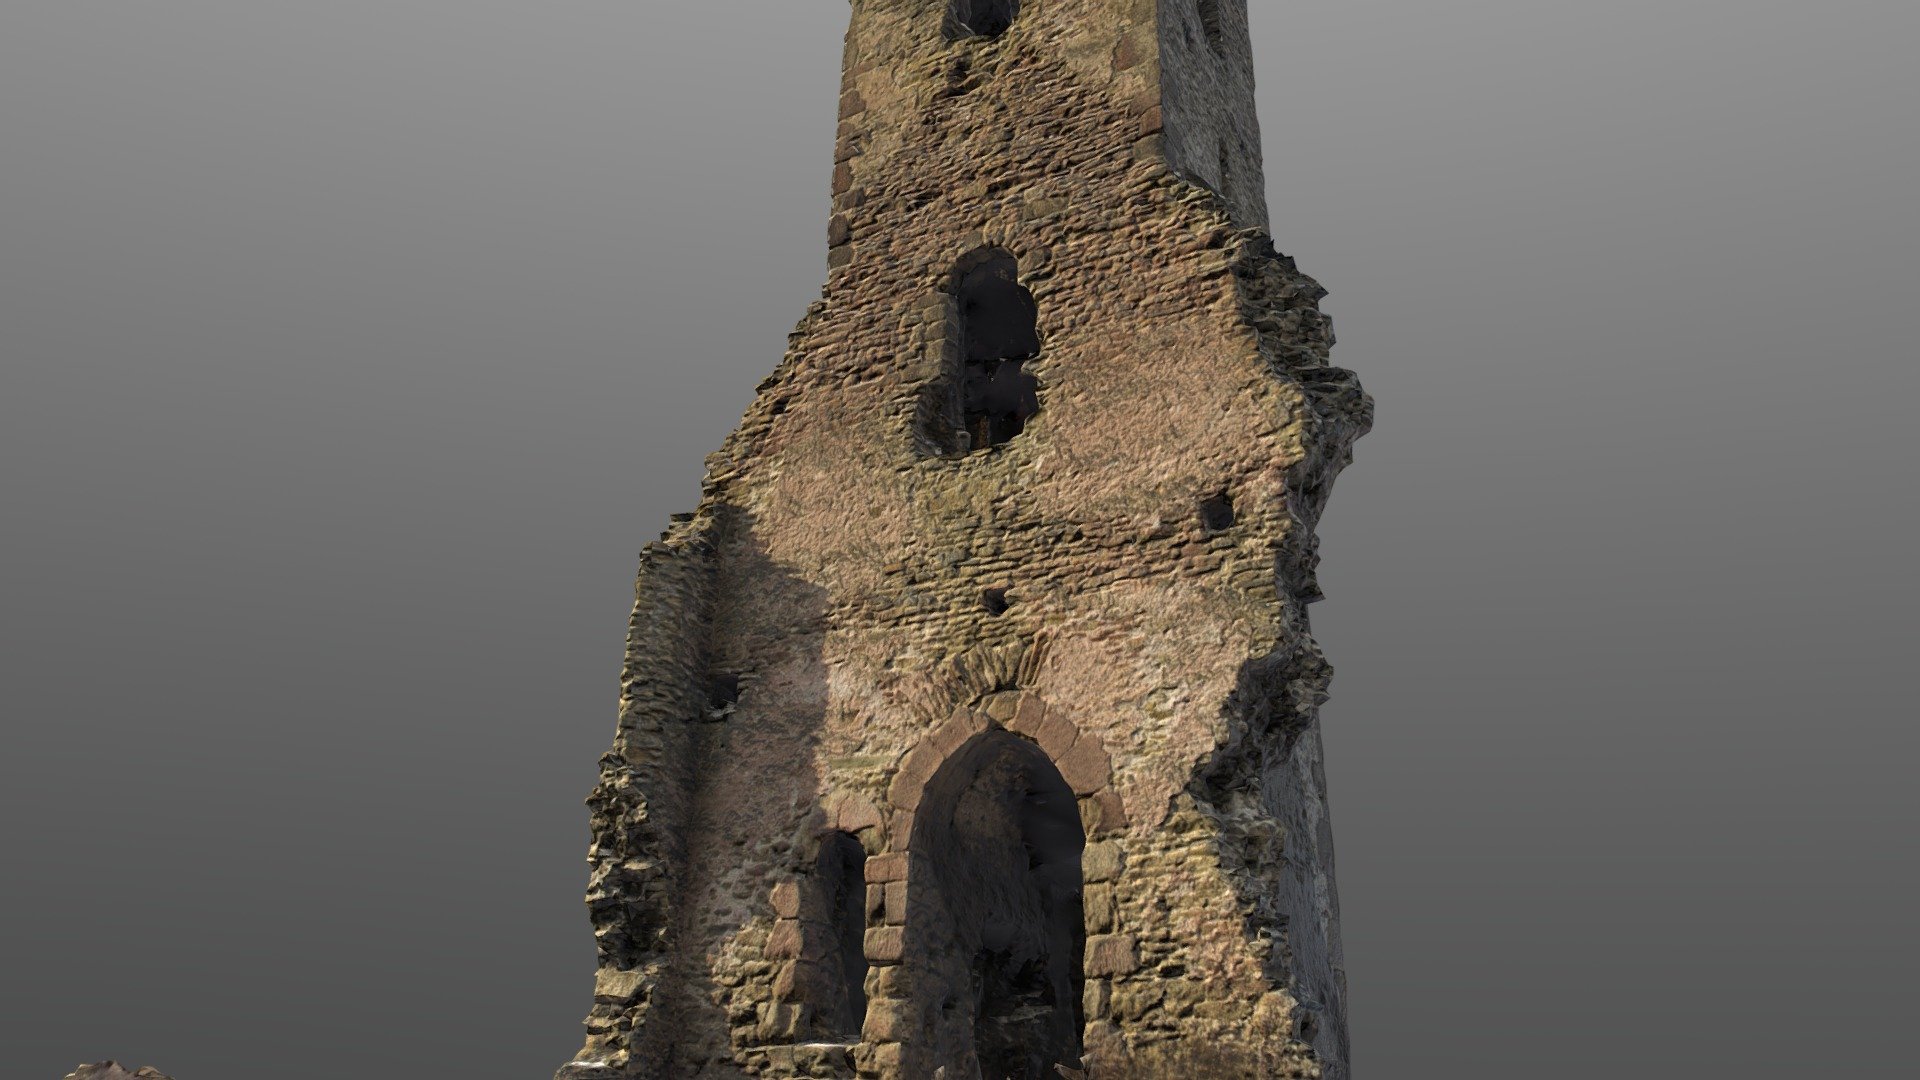 It is a scan from a drone of a church tower from non existing vilage Miloj in Slovakia. 
Images processed in RealityCapture 3d model